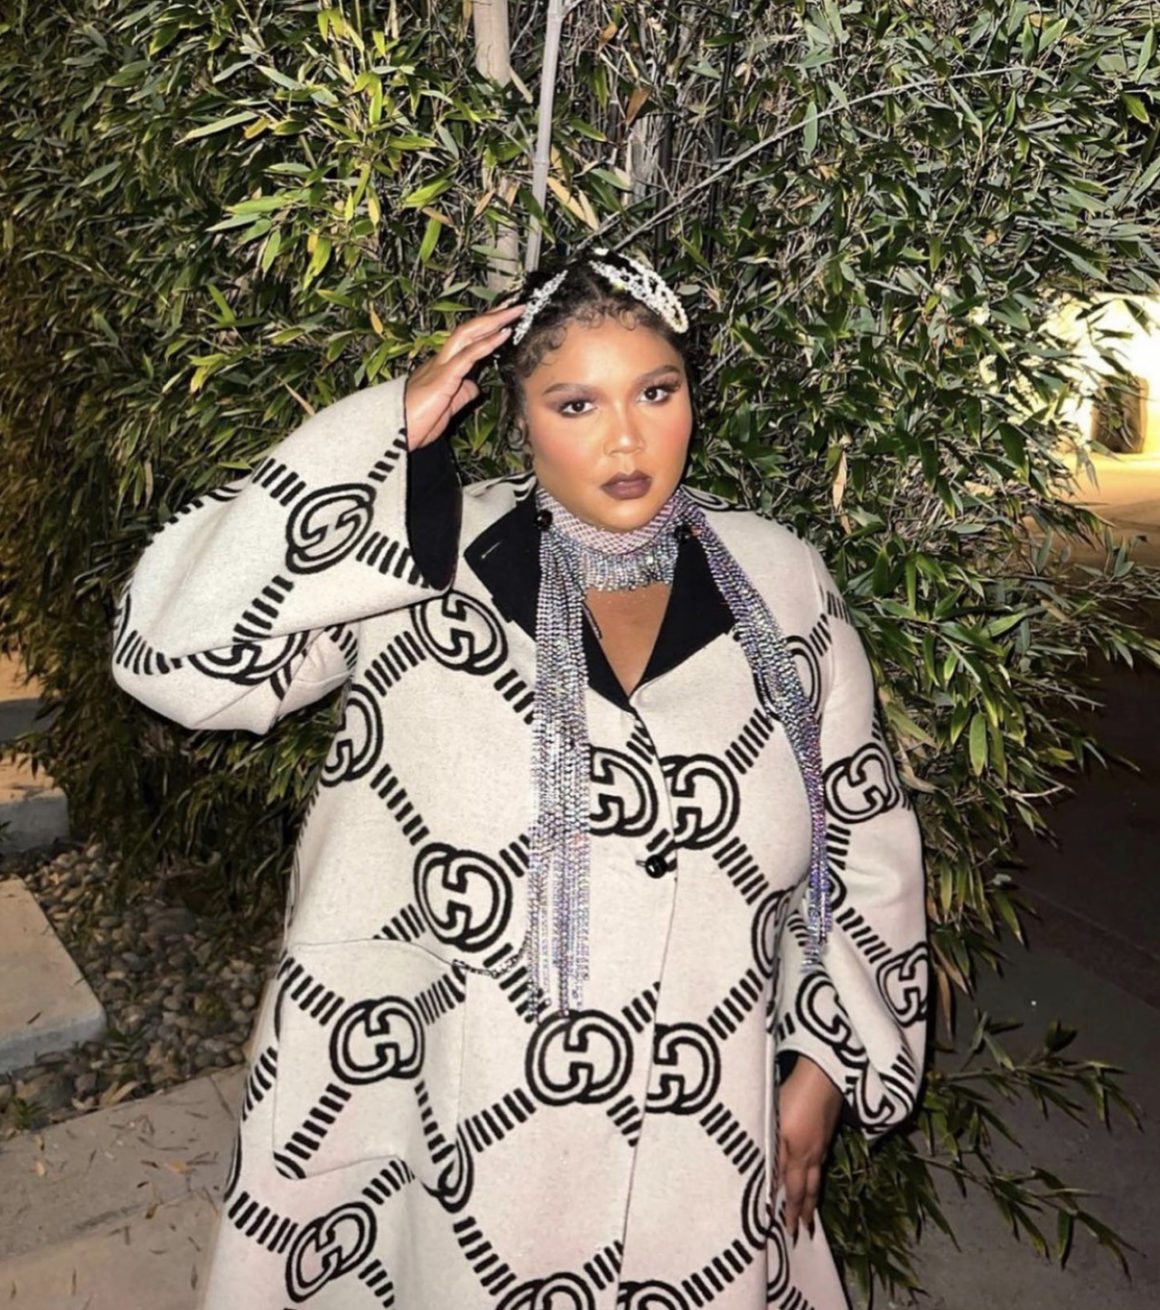 Lizzo Attends the Gucci Love Parade Wearing the Brand's Reversible